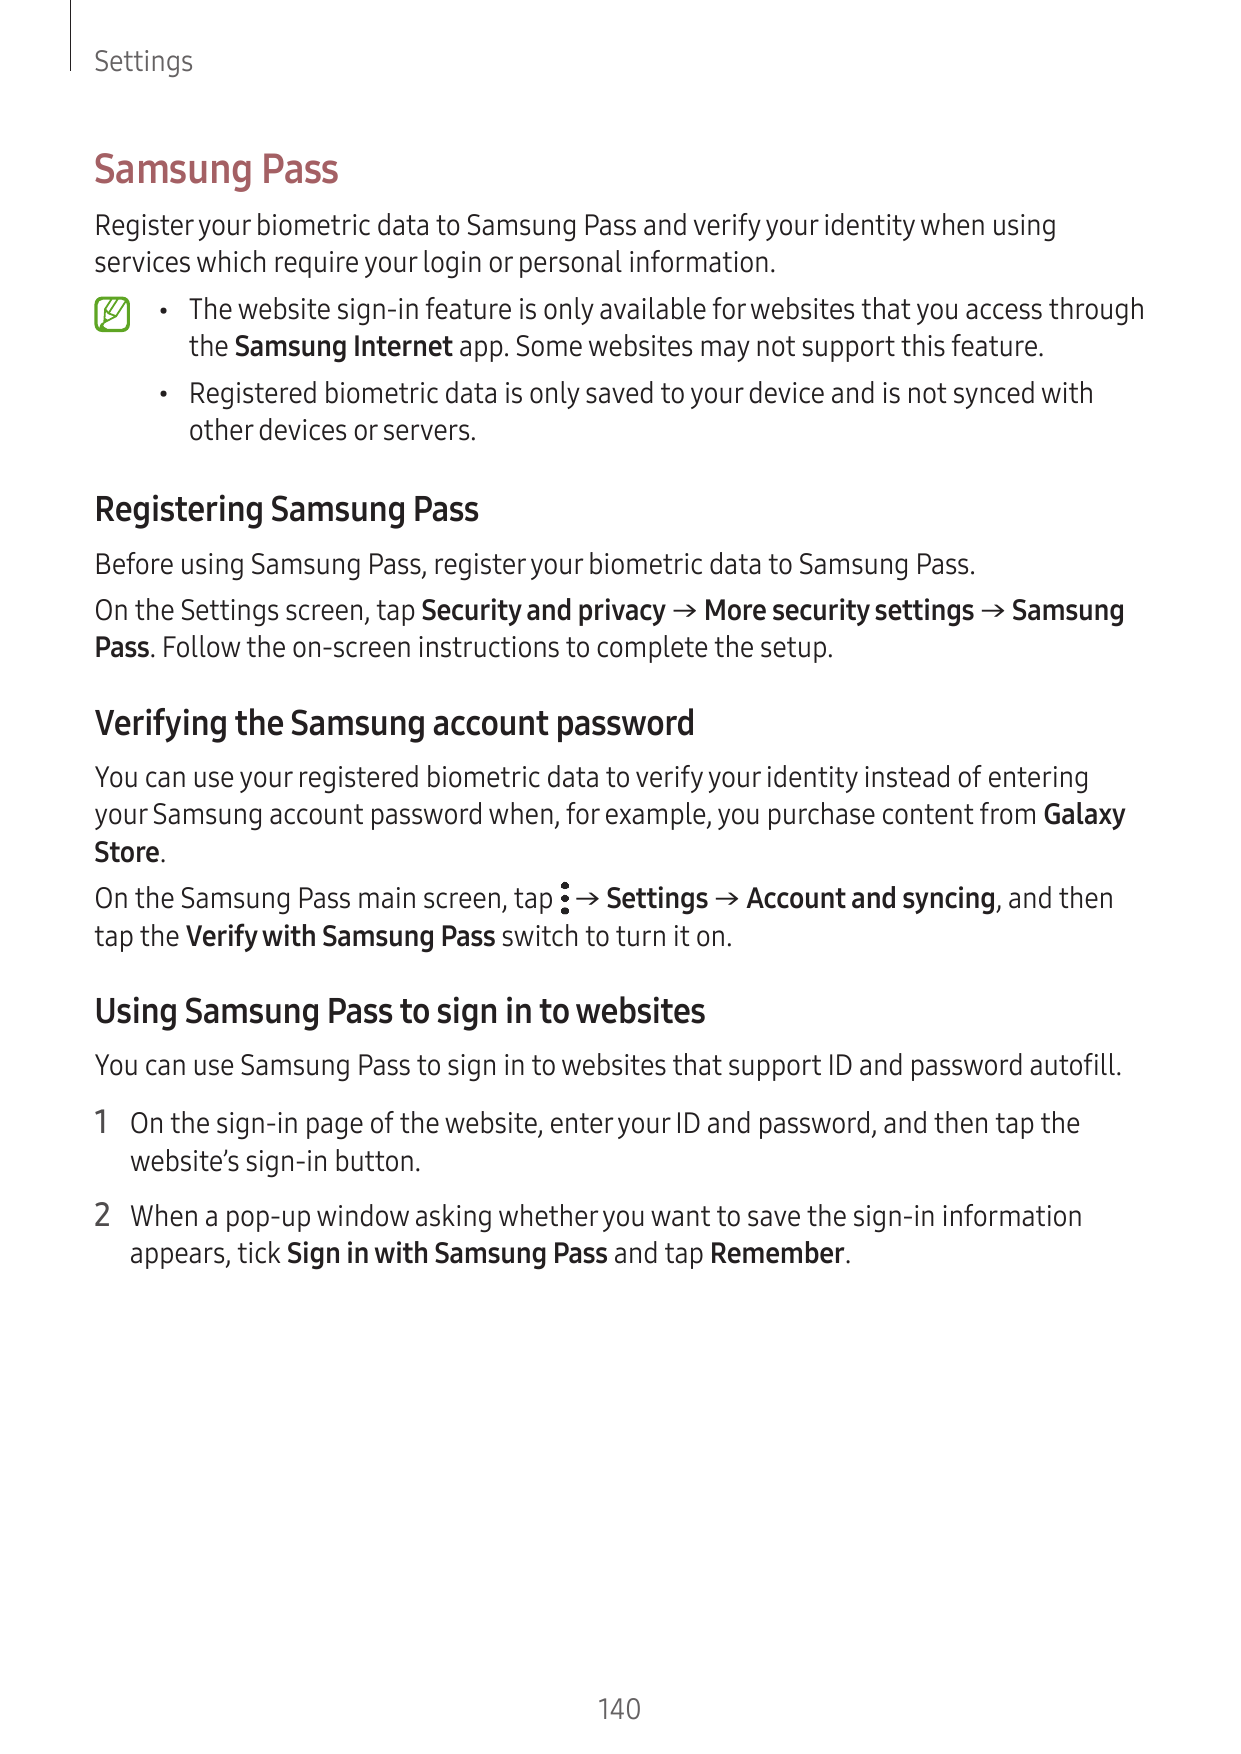 SettingsSamsung PassRegister your biometric data to Samsung Pass and verify your identity when usingservices which require your 